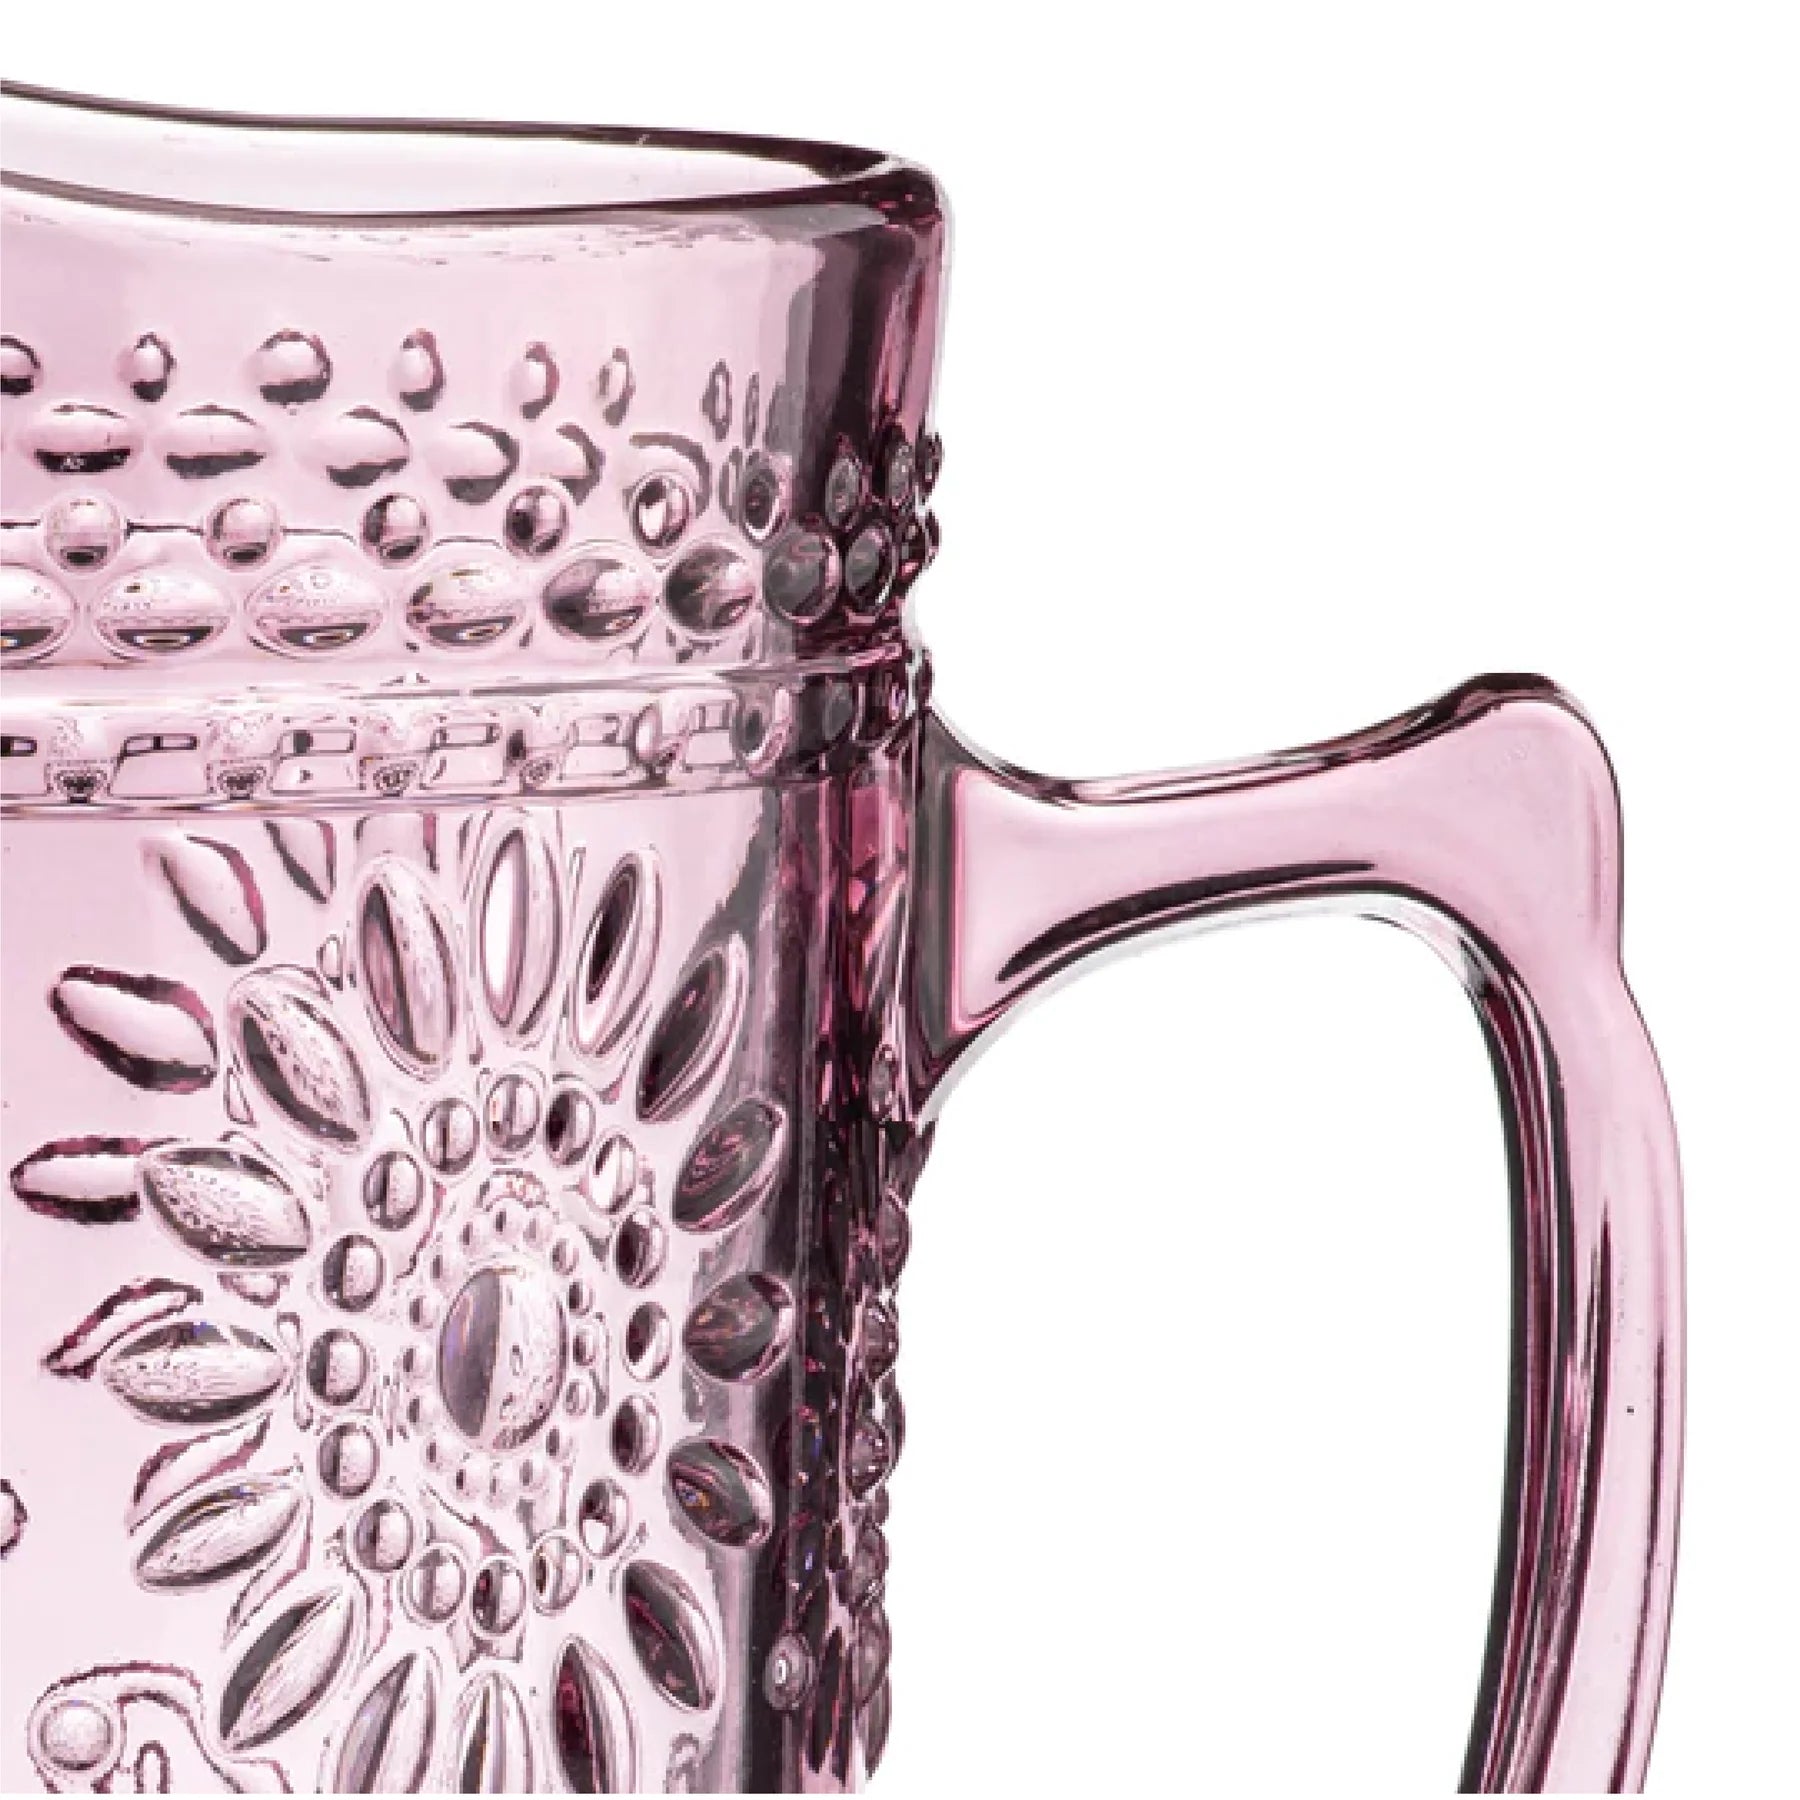 Lily'S Home Sunflower Pink Jug